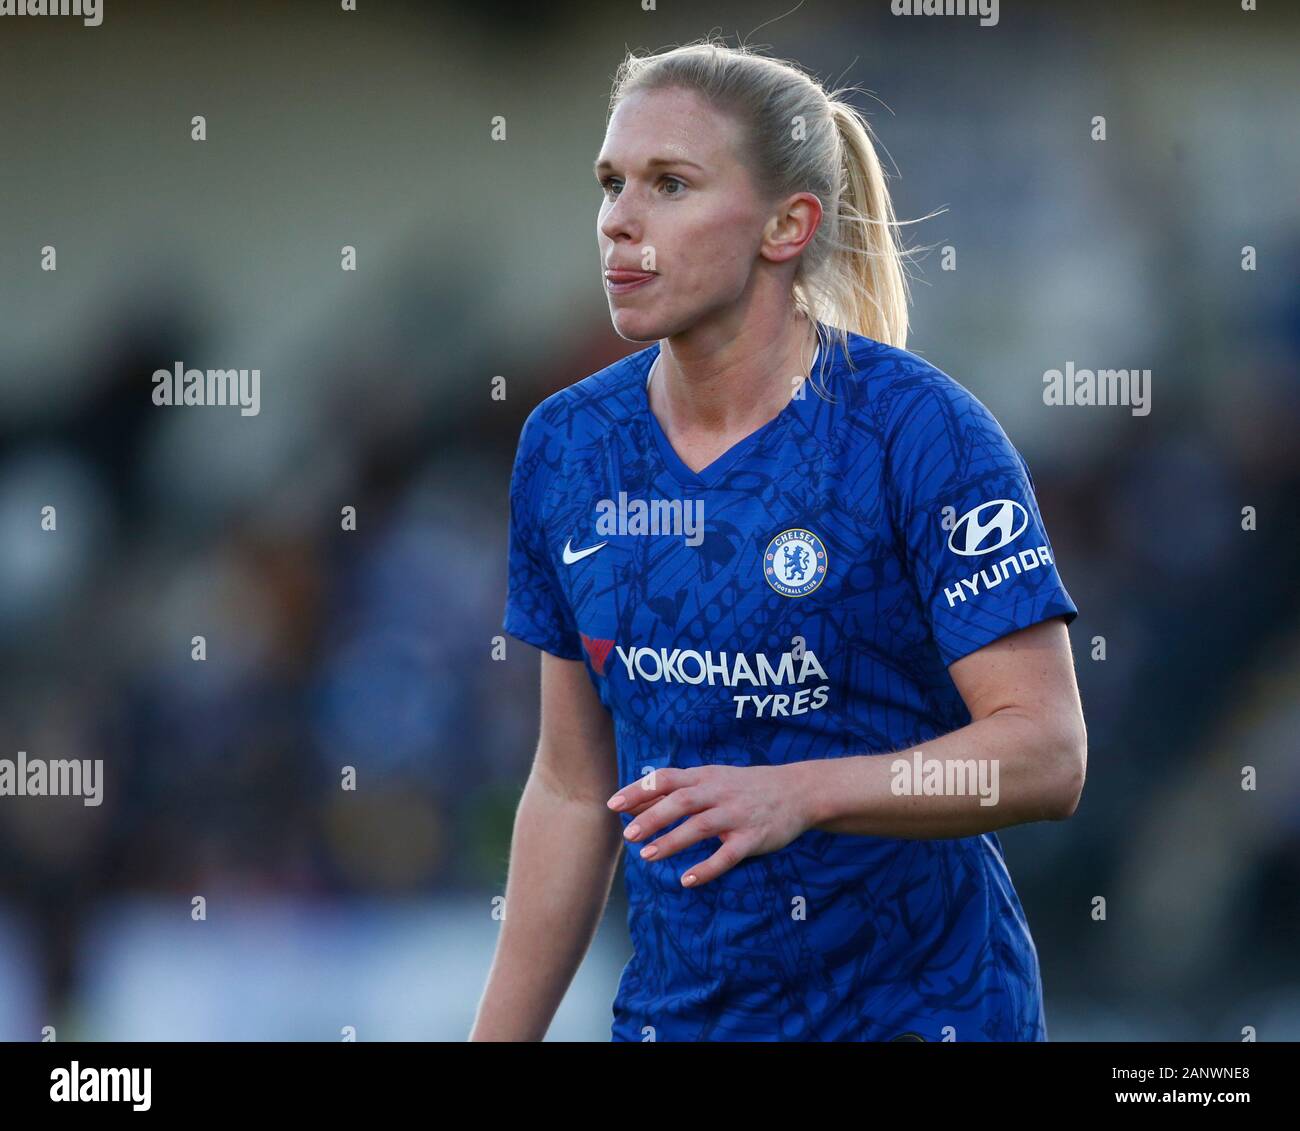 Chelsea Ladies Jonna Andersson during Barclays Women's Super League match between Arsenal Women and Chelsea Women at Meadow Park Stadium on January 19, 2020 in Borehamwood, England (Photo by AFS/Espa-Images) Stock Photo